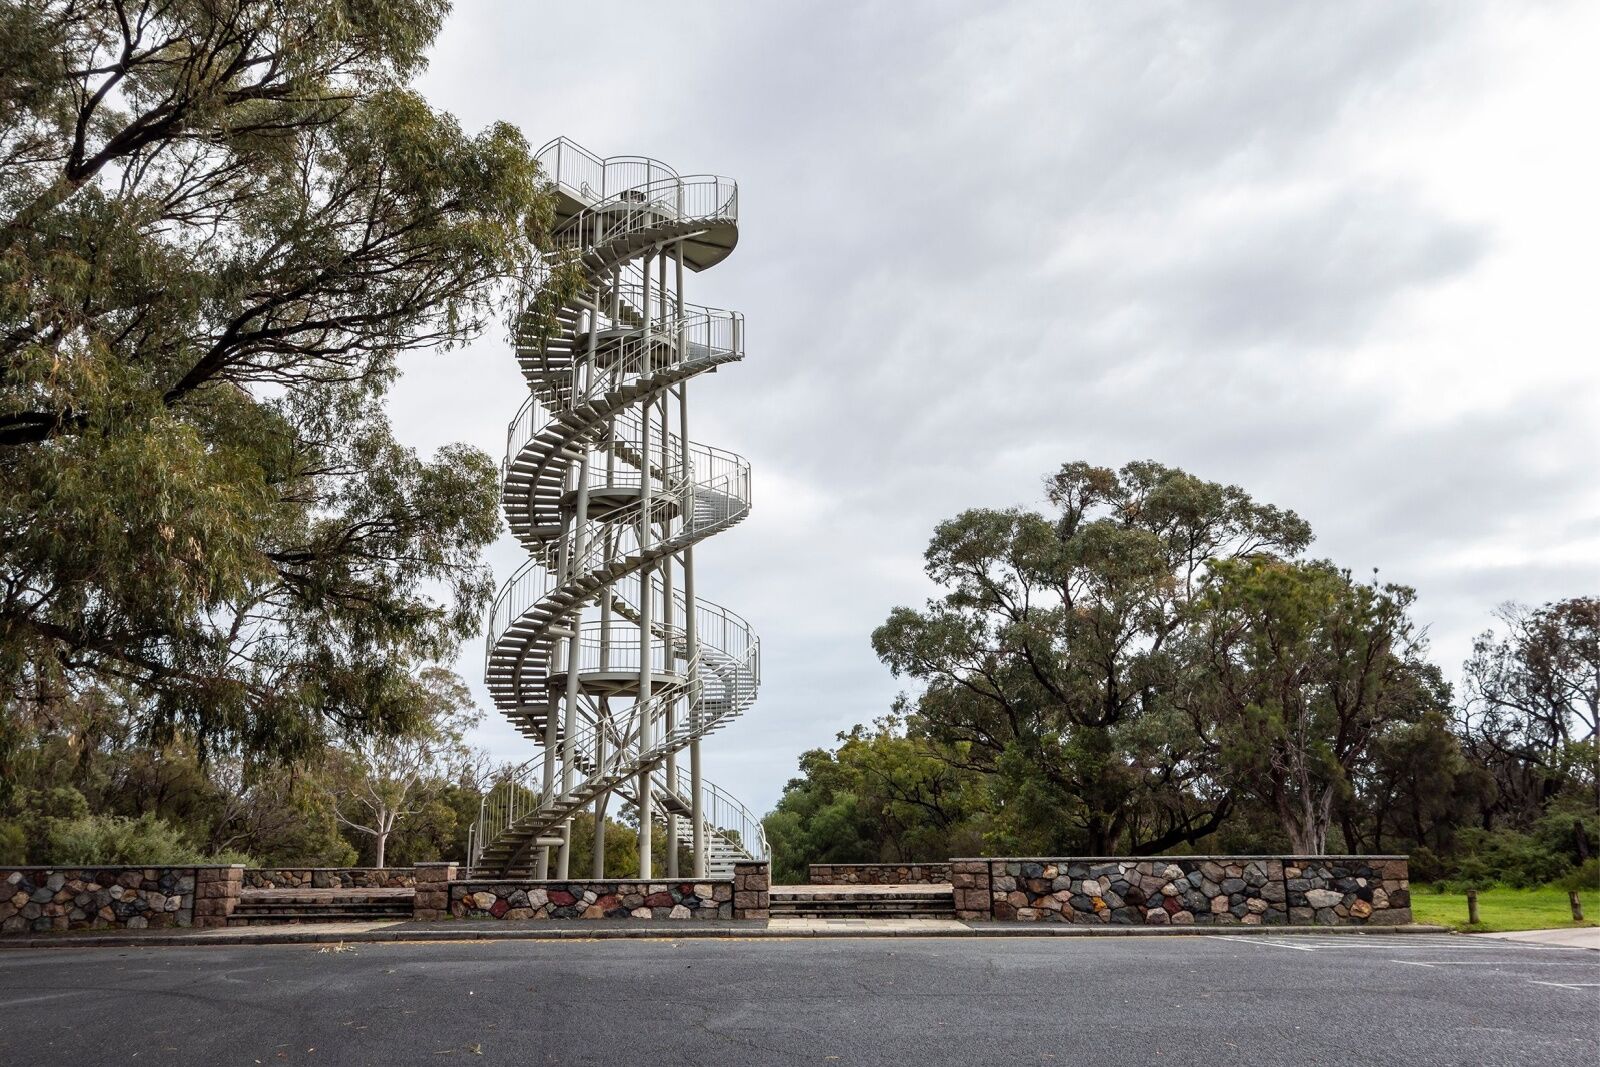 Parks in Perth - DNA tower